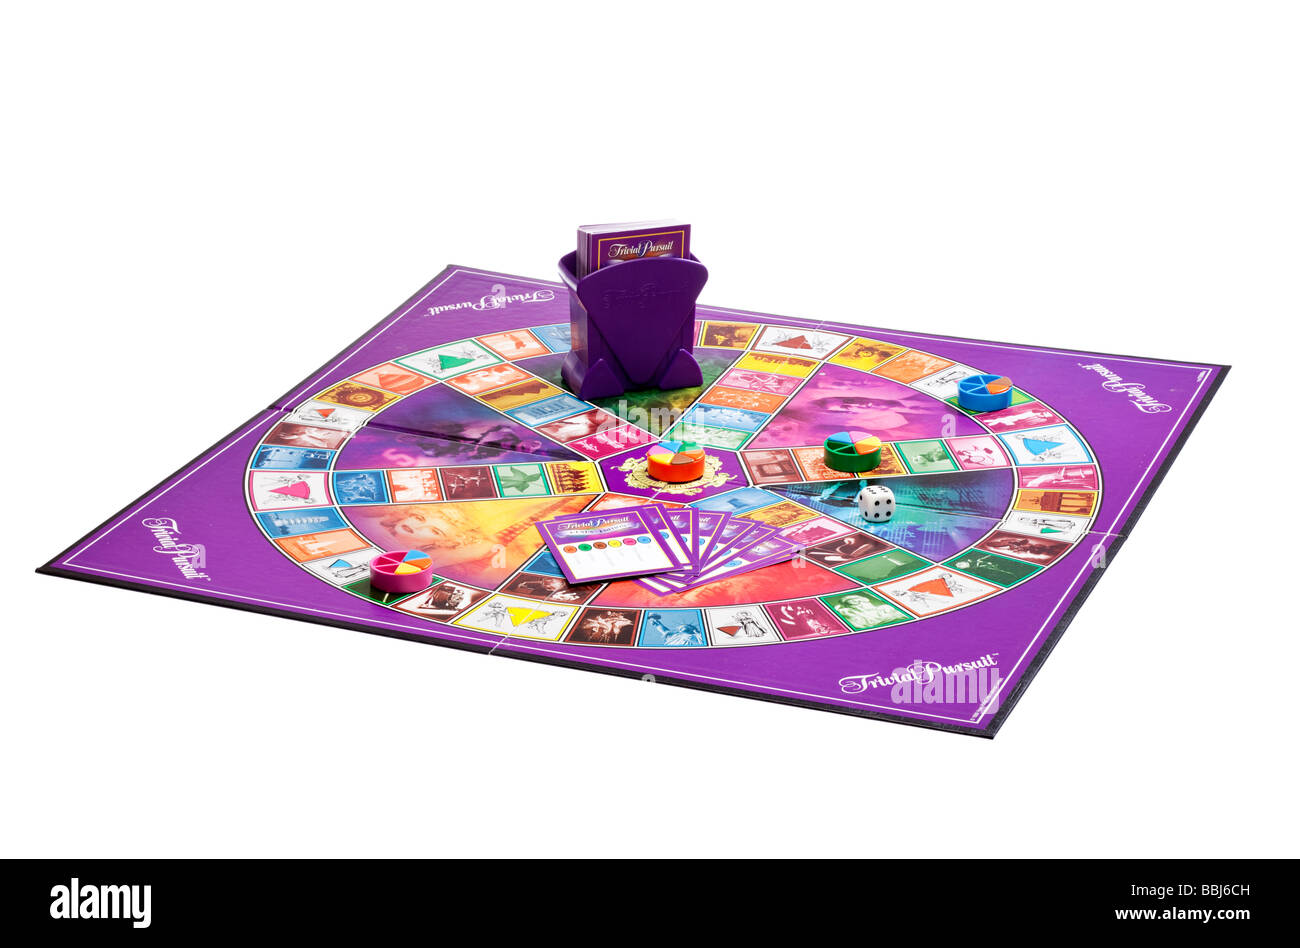 Trivial Pursuit board game with pieces Stock Photo